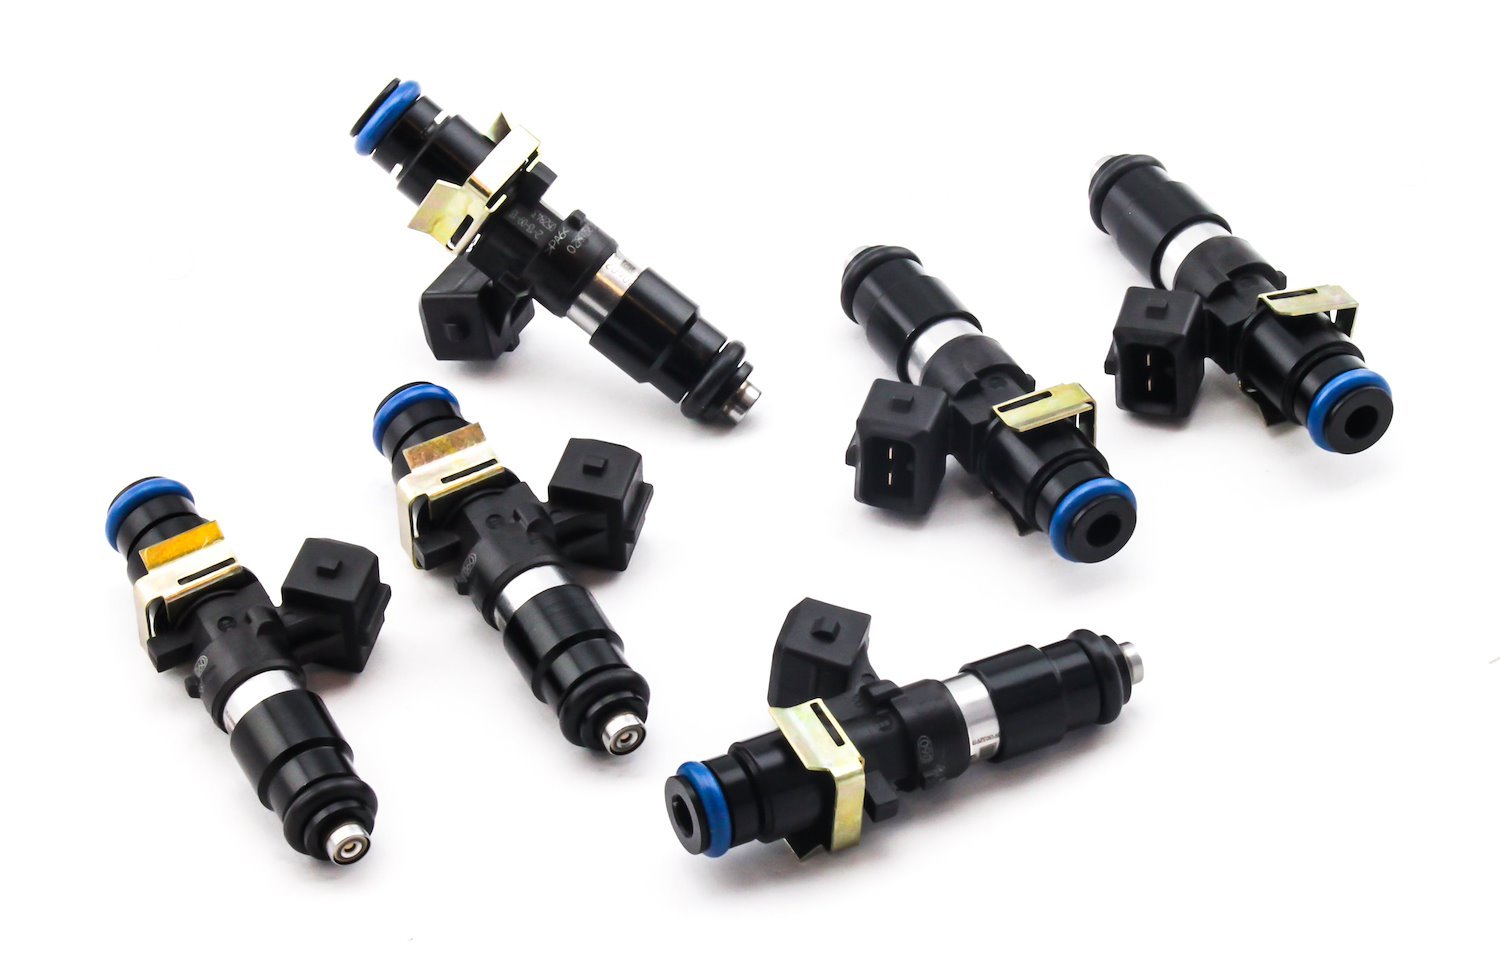 16MX1412006 Bosch EV14 1200cc high impedance Injectors for Toyota Supra TT 93-98. for top feed conversion 14mm O-ring.